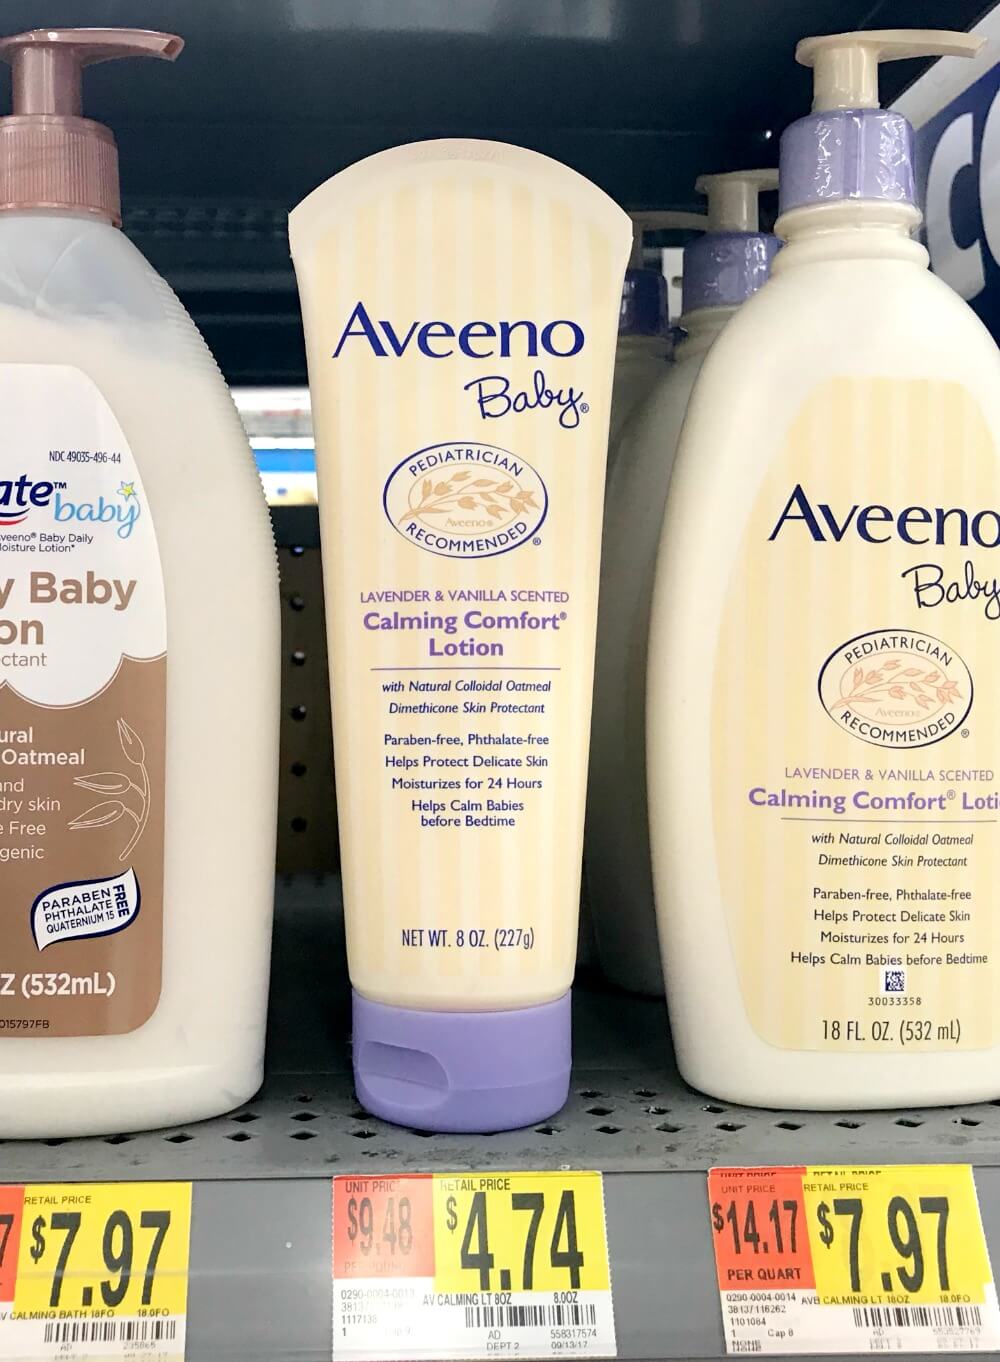 better-than-free-aveeno-baby-lotion-at-walmart-ibotta-rebate-living-rich-with-coupons